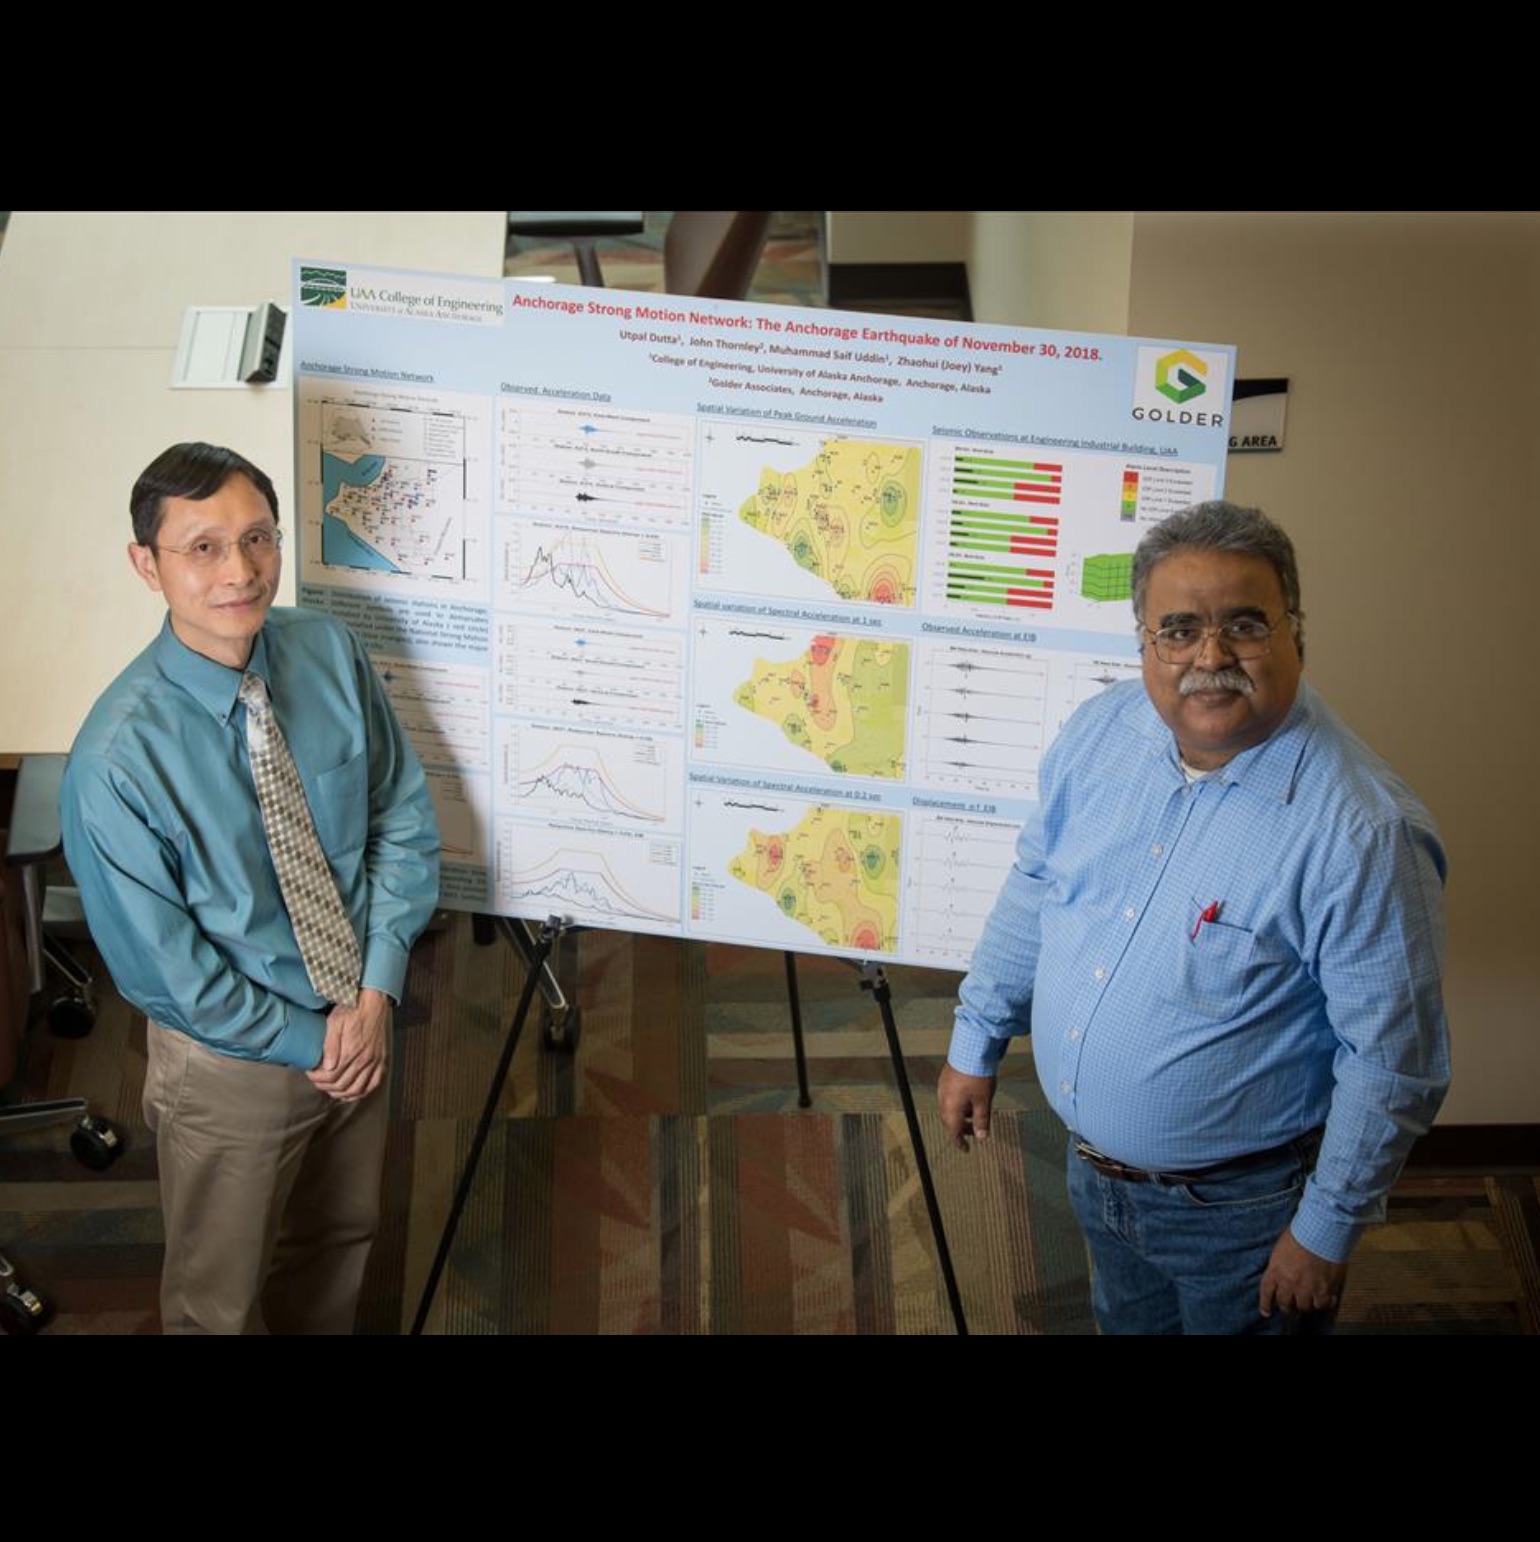 Dr. Joey Yang and Dr. Utpal Dutta stand in front of a poster.